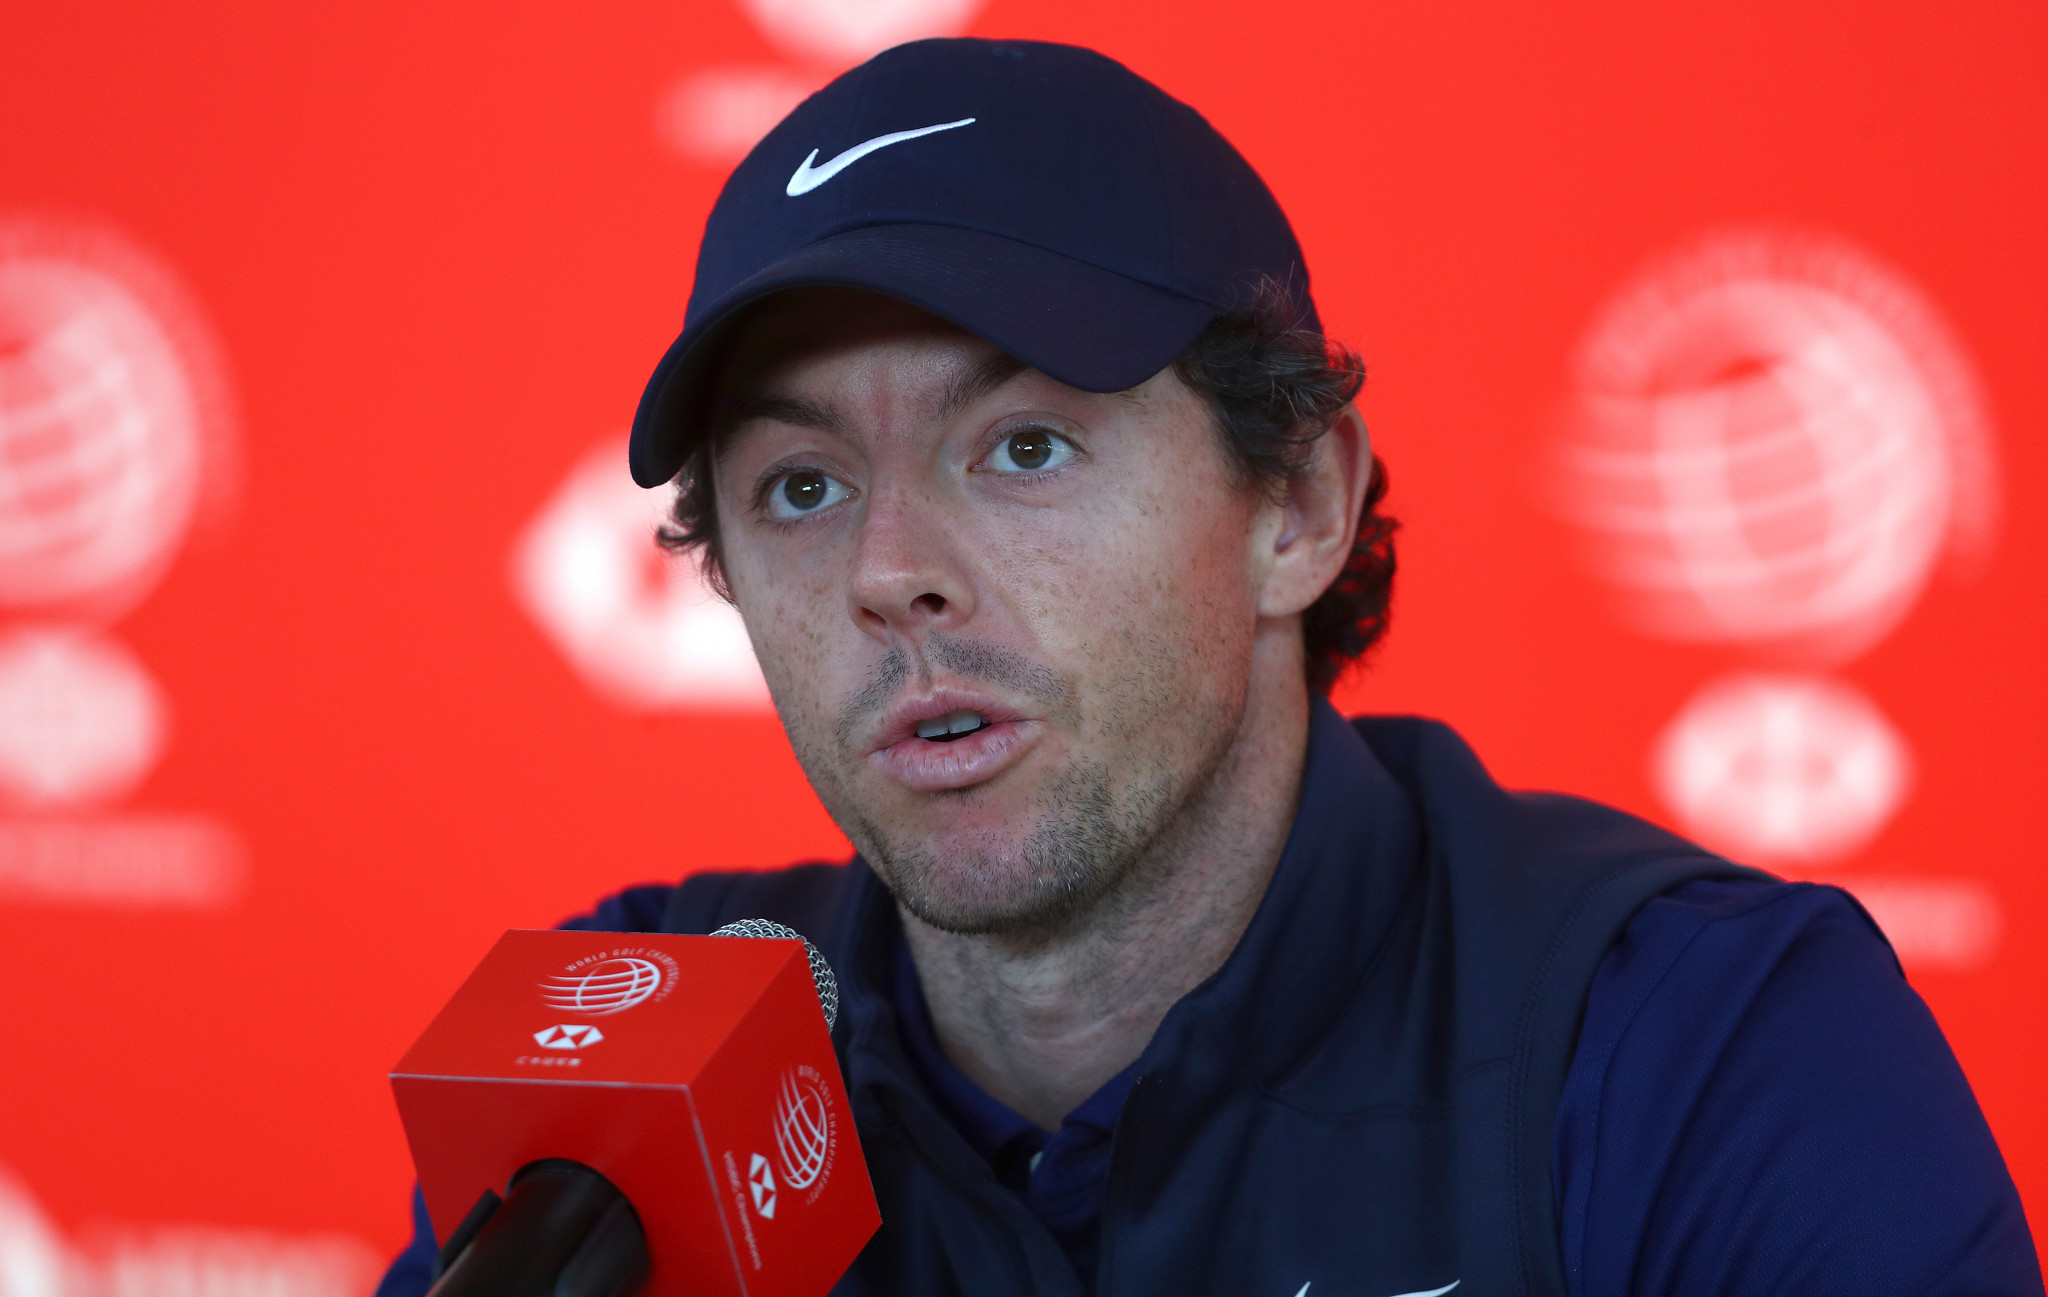 McIlroy strong favourite at WGC-HSBC Champions event